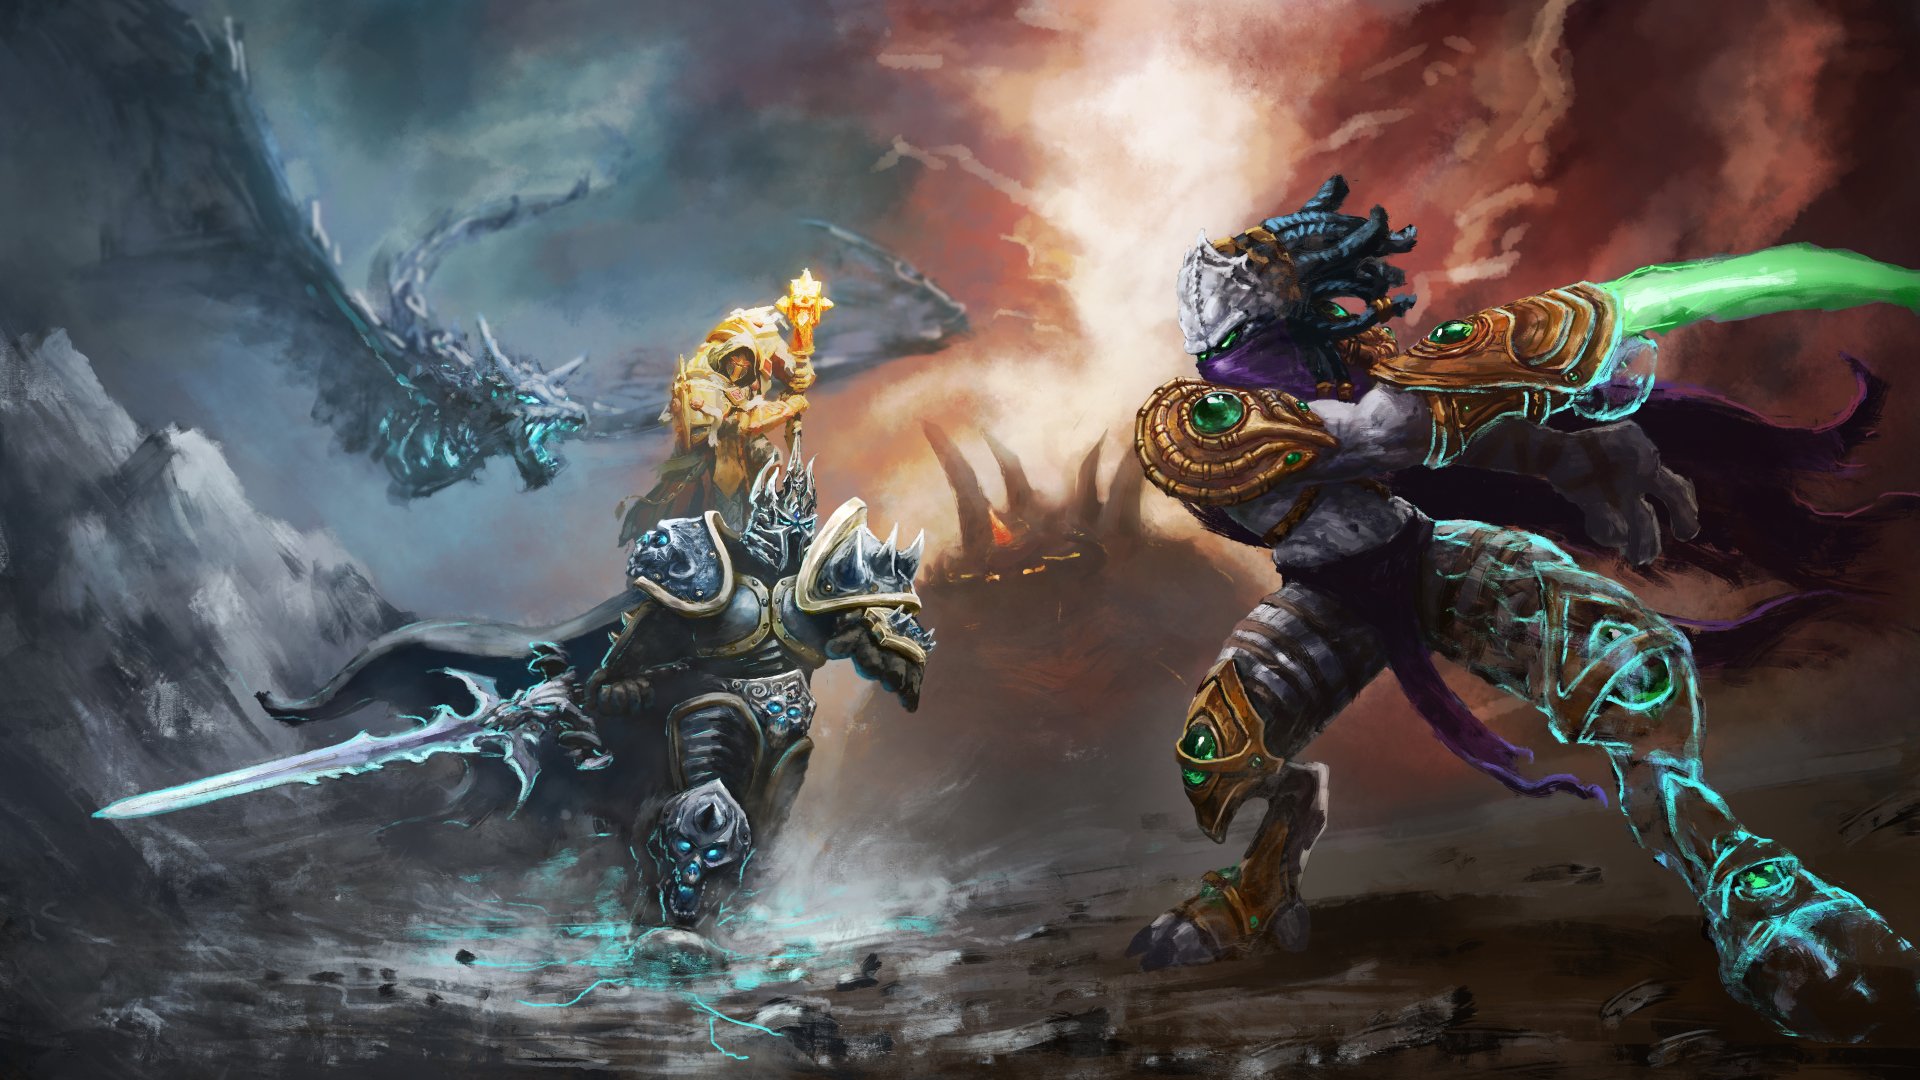 heroes of the storm wallpaper 1920x1080,action adventure game,pc game,games,cg artwork,strategy video game